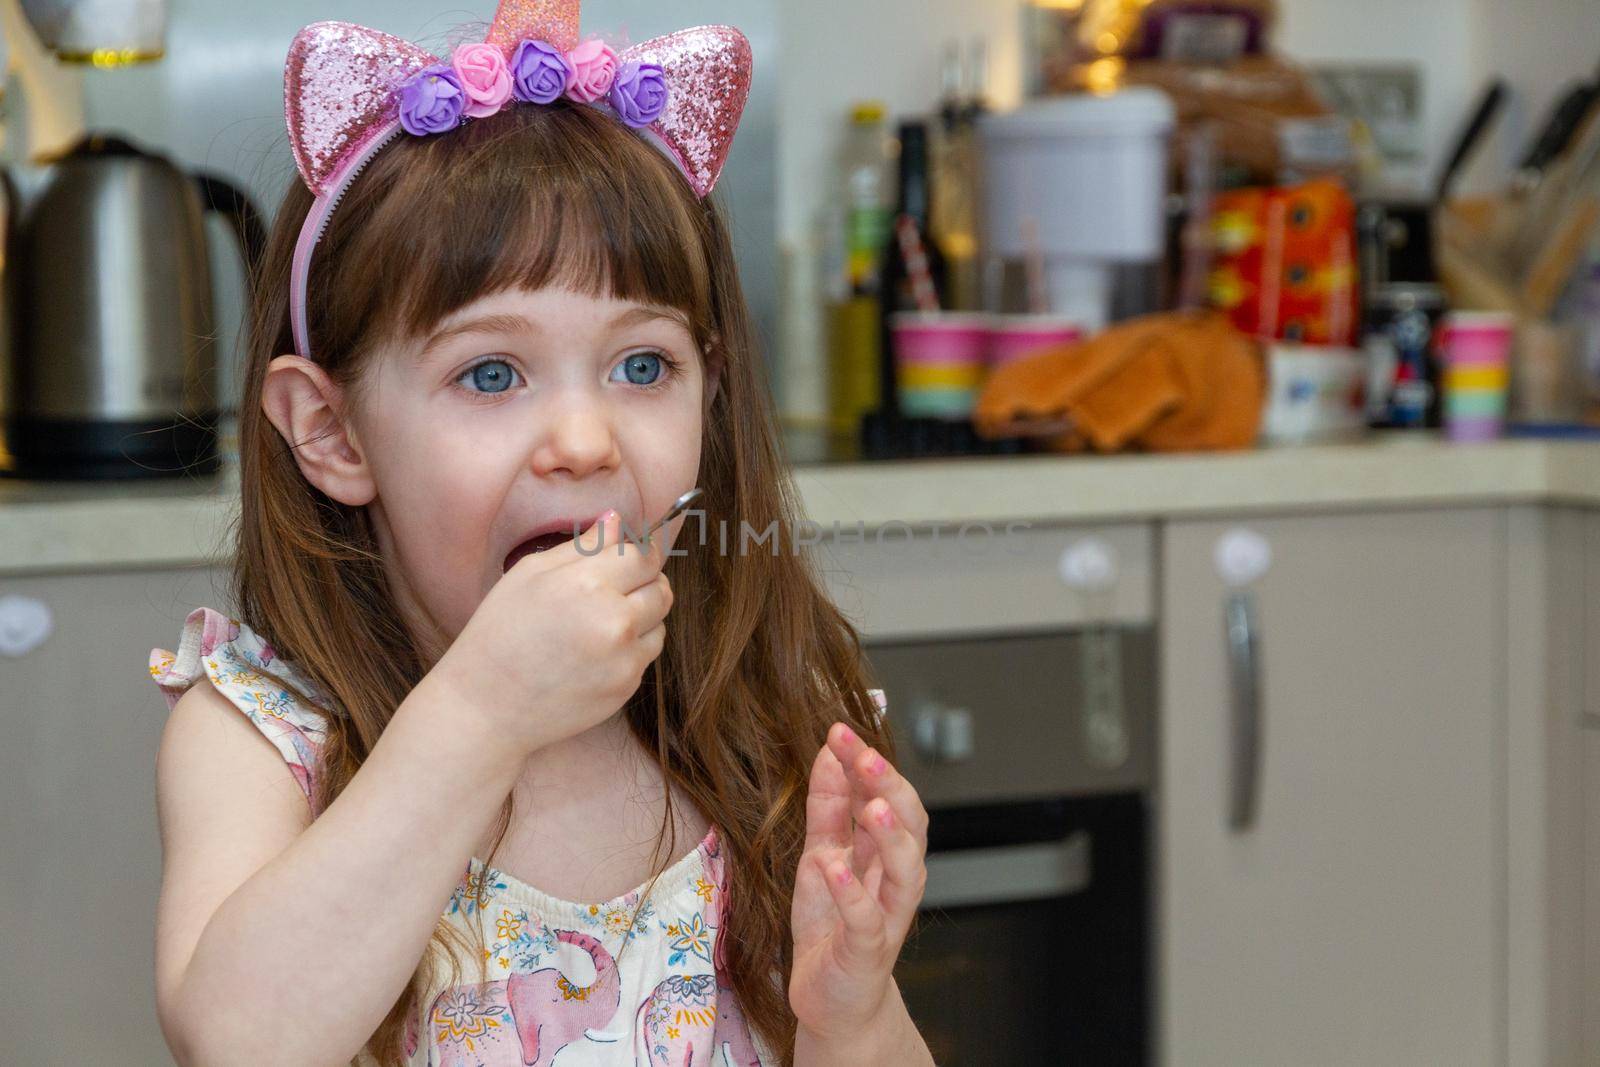 Portrait of a cute, brown-haired, blue-eyed baby girl in a kitchen wearing a headband and eating with a spoon